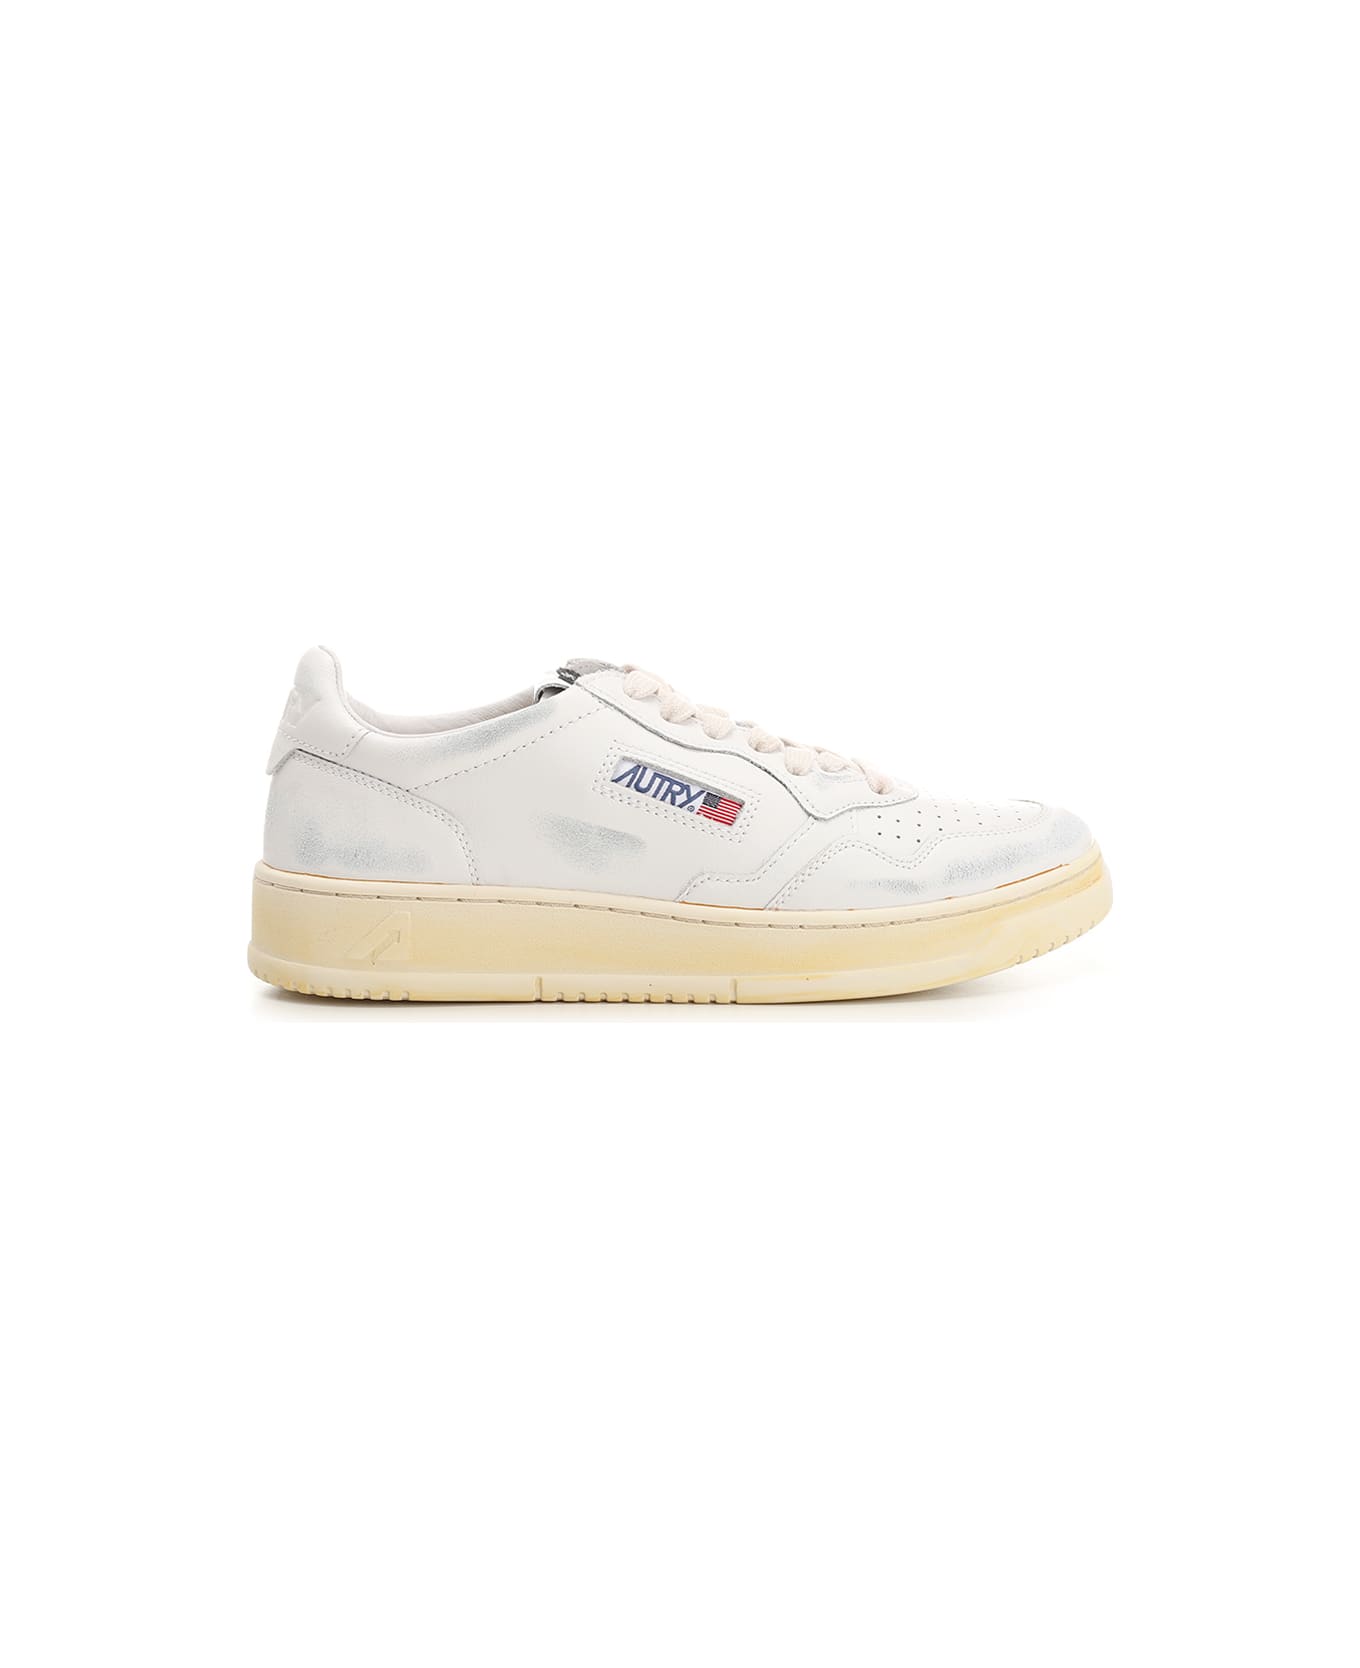 Autry Super Vintage Low Sneakers - WHITE GLUE スニーカー